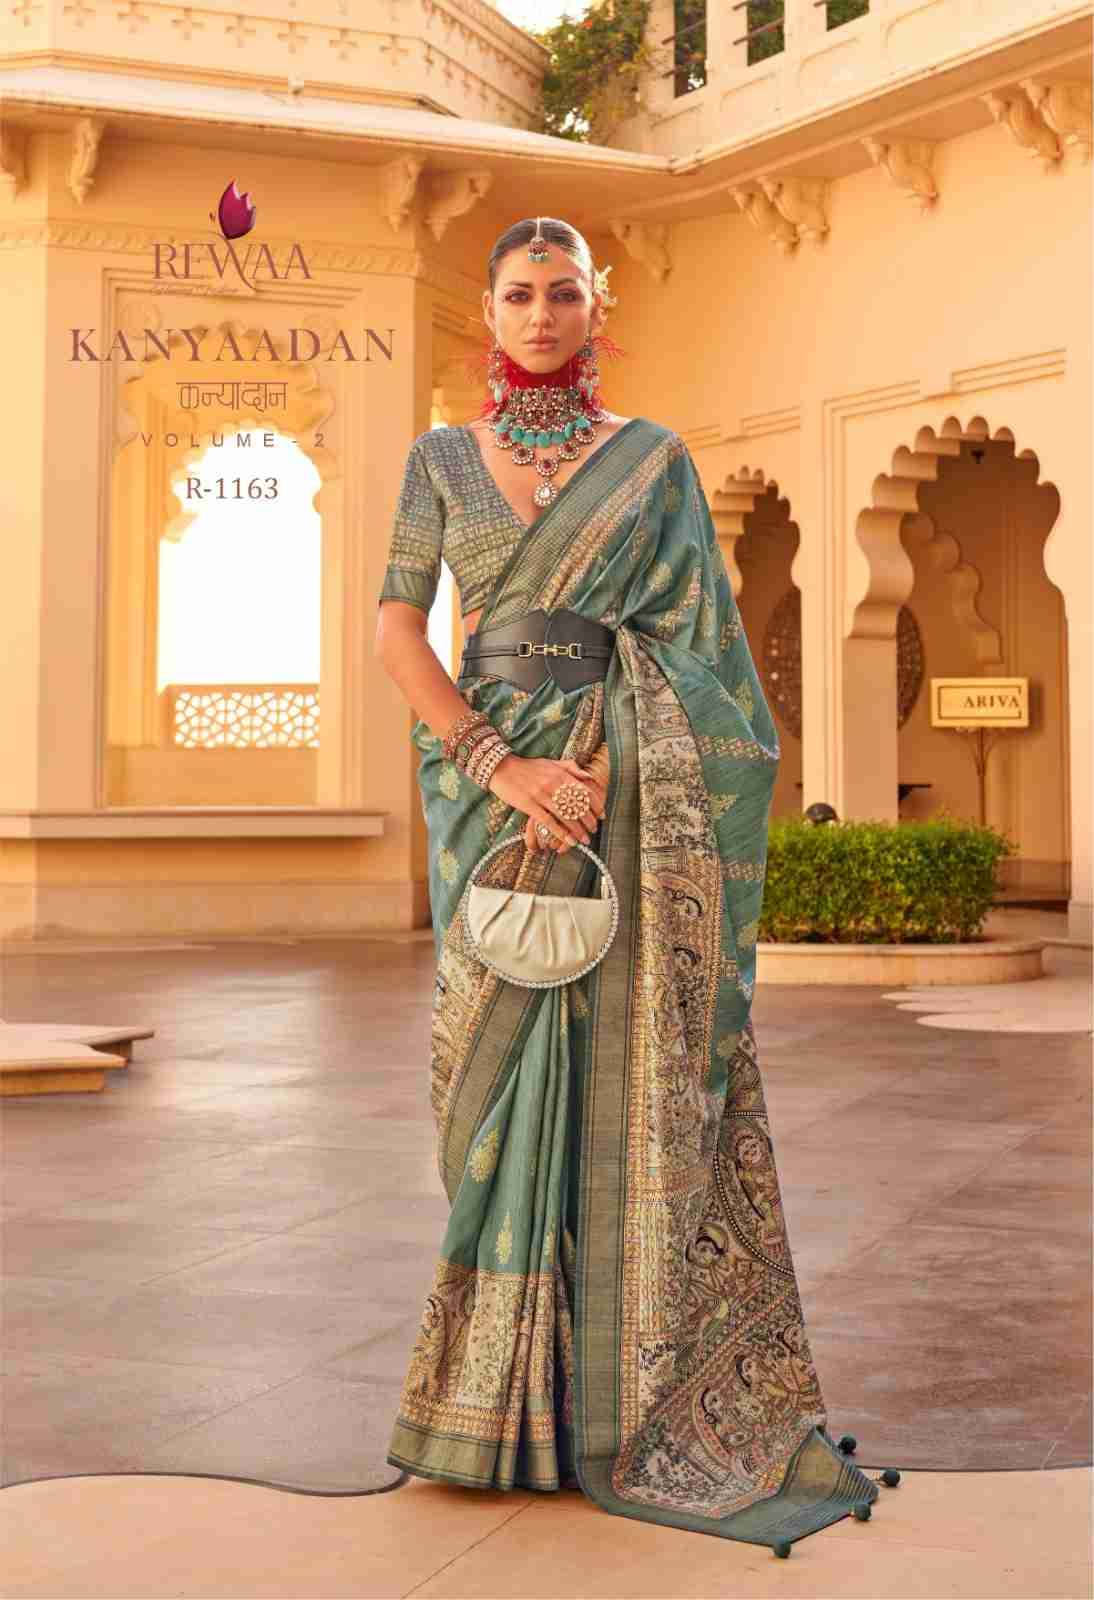 Kanyaadan Vol-2 By Rewaa 1156 To 1164 Series Indian Traditional Wear Collection Beautiful Stylish Fancy Colorful Party Wear & Occasional Wear Pure Silk Sarees At Wholesale Price